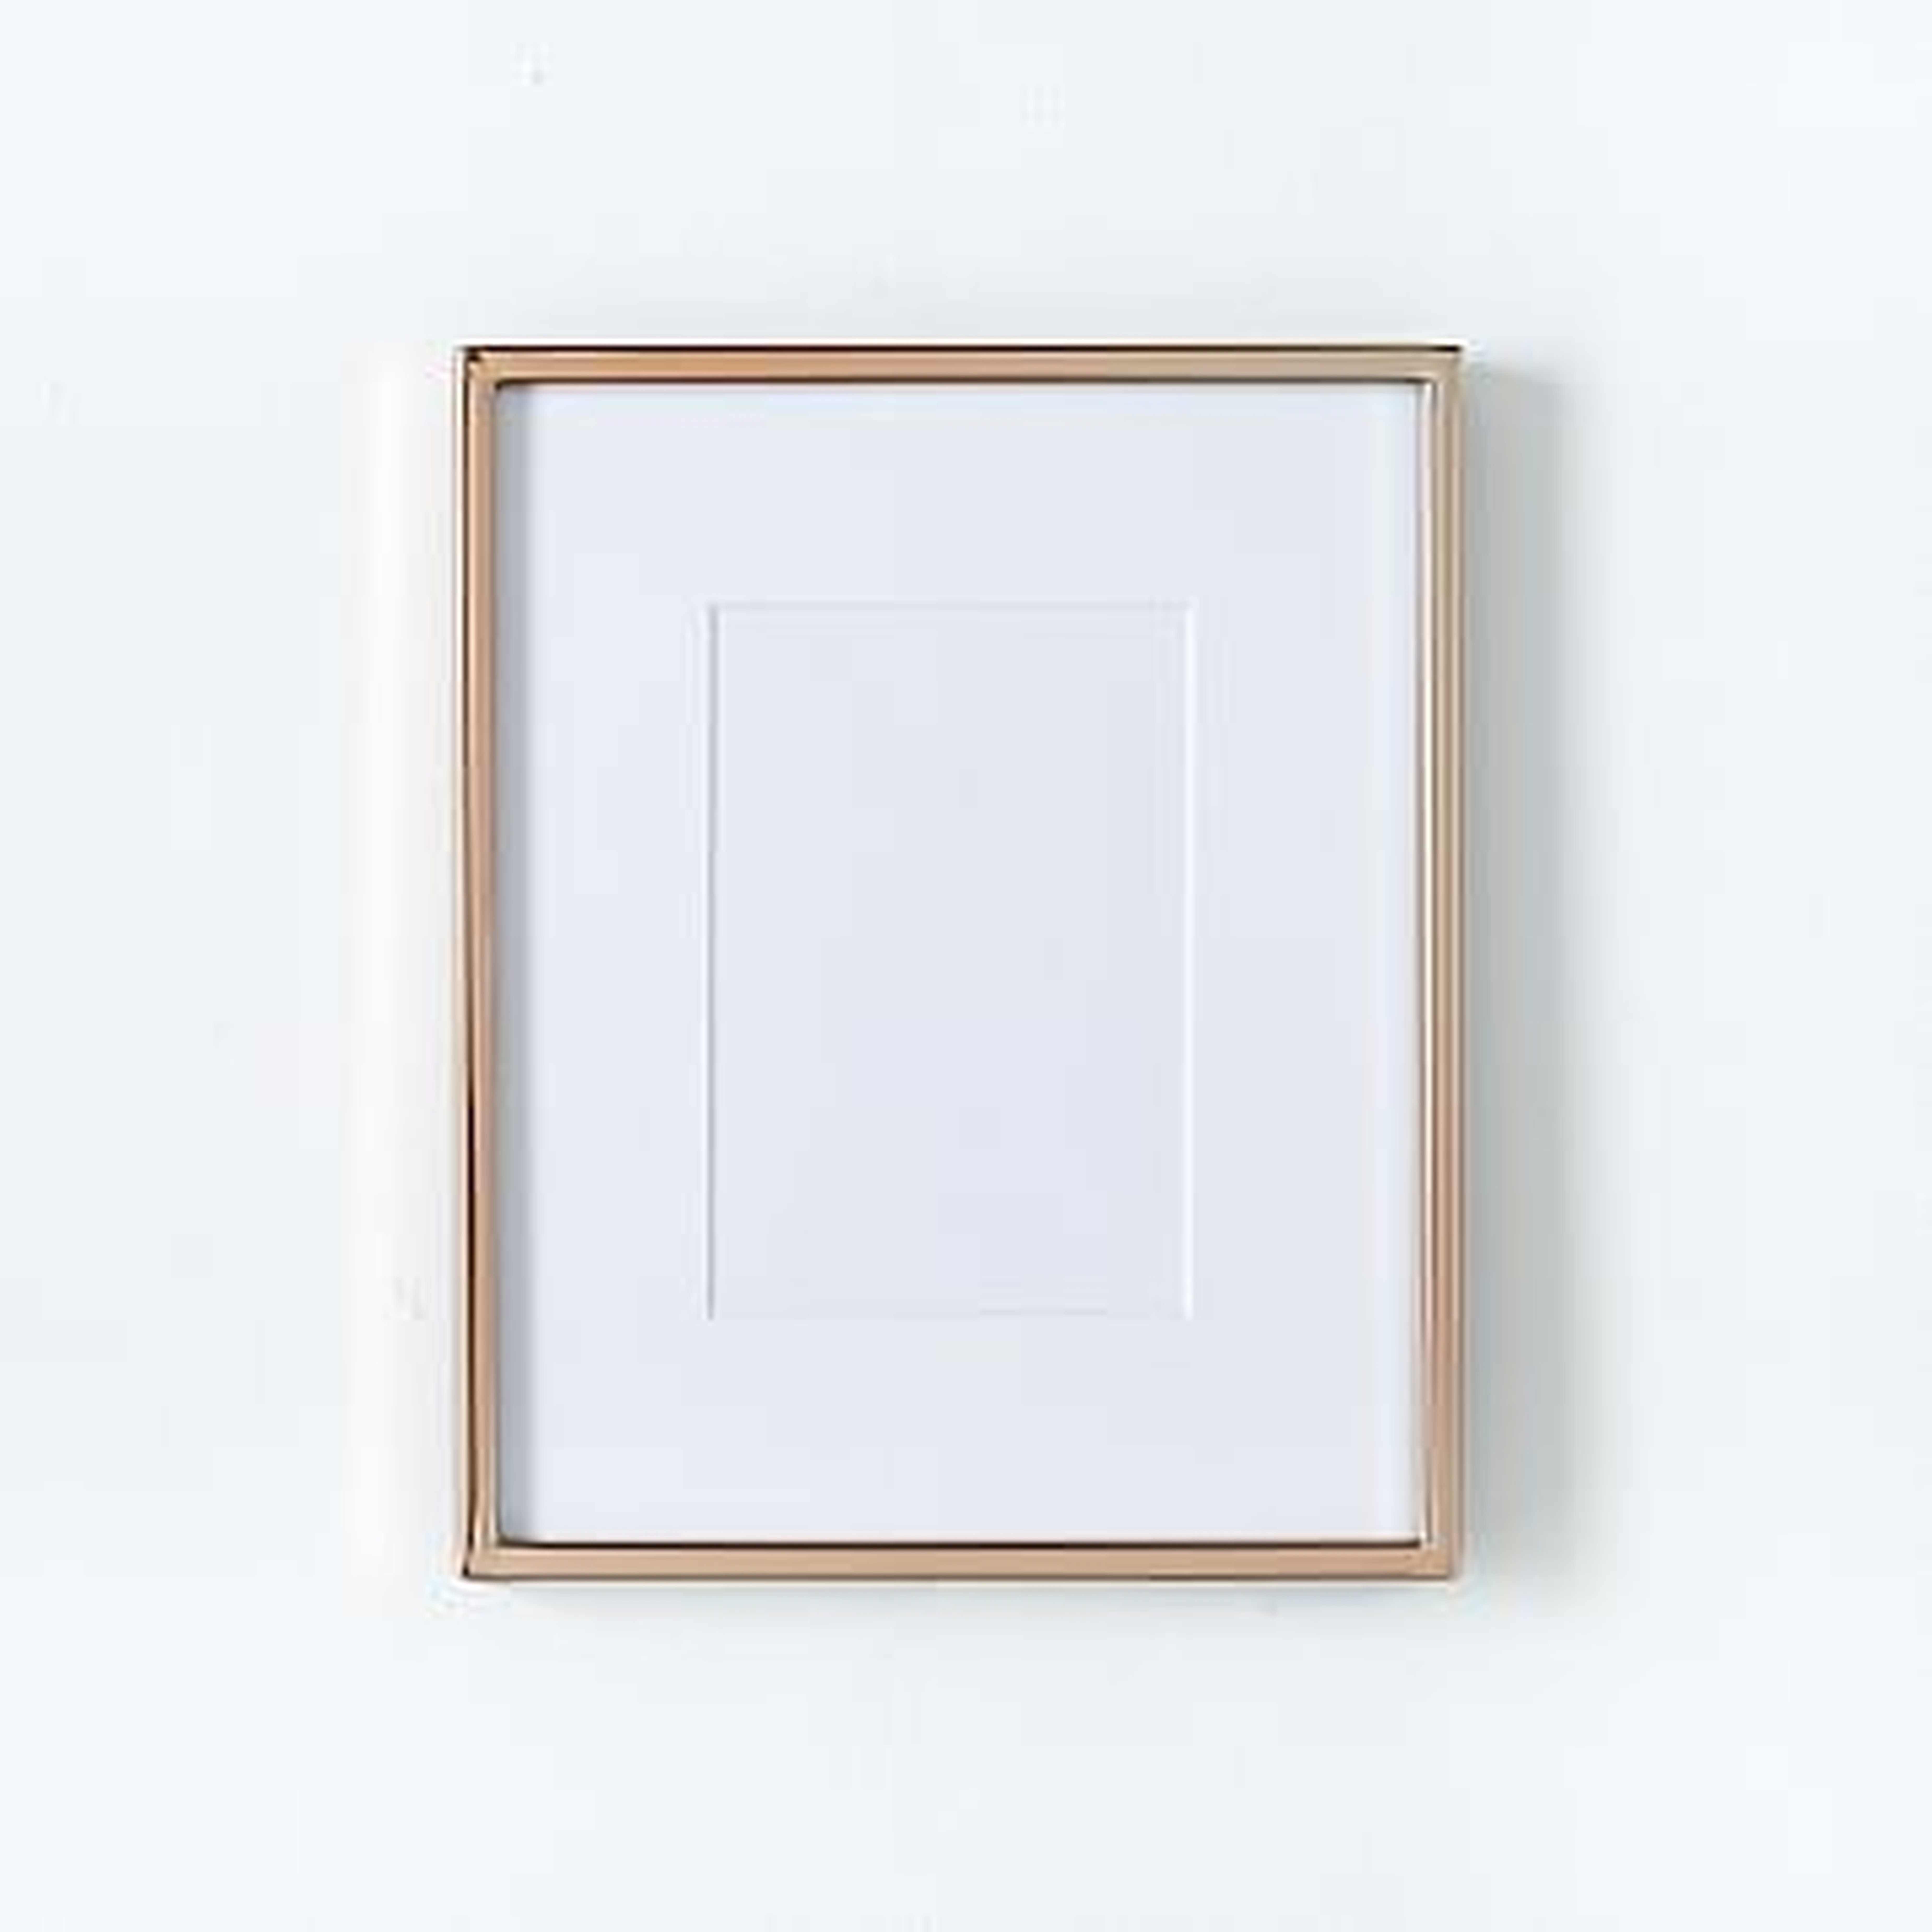 Gallery Frame, Rose Gold, 4" x 6" (8" x 10" without mat) - West Elm